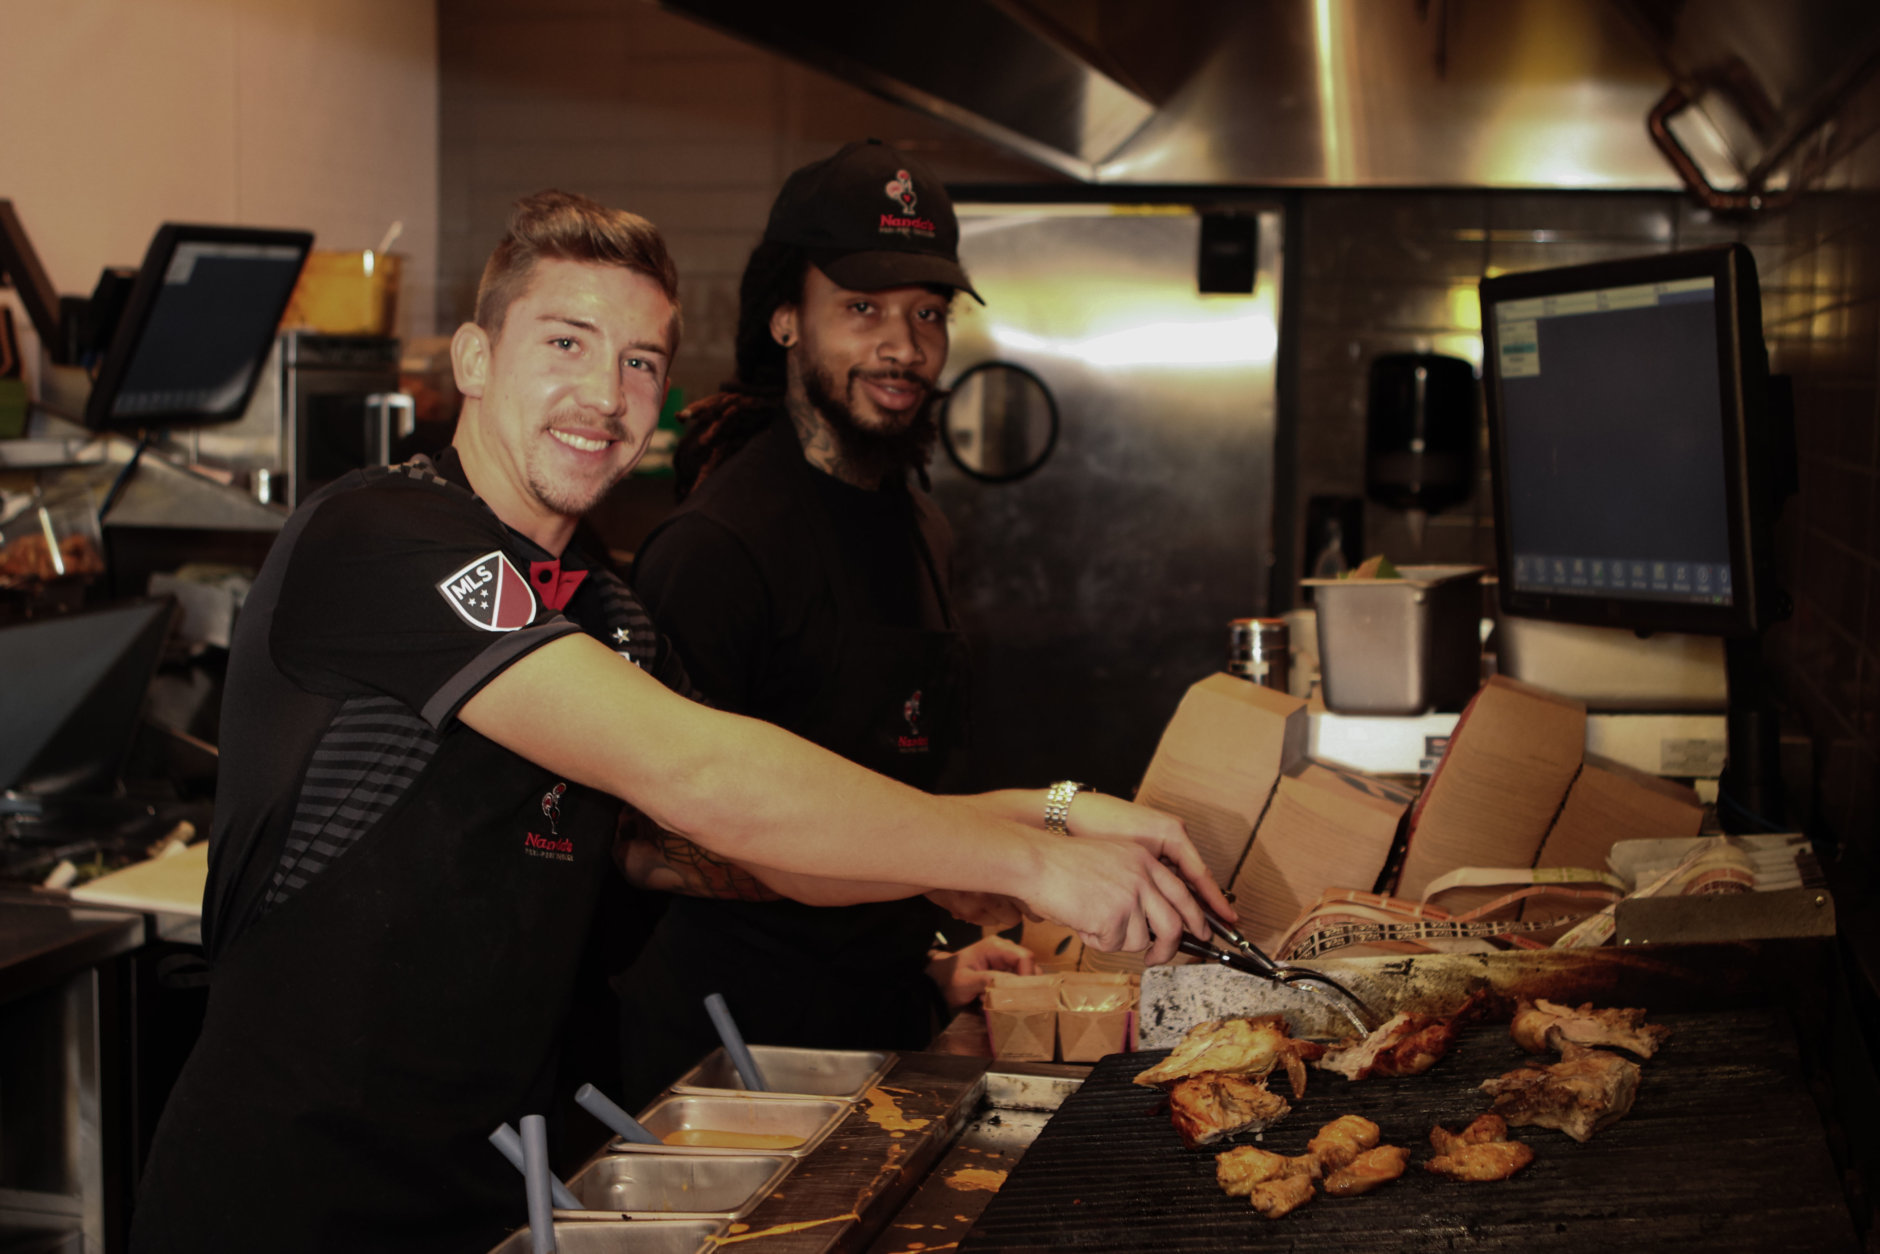 D.C. United player Russell Canouse practices his grilling skills before the April 12 event. (Courtesy Seven Oaks Media)